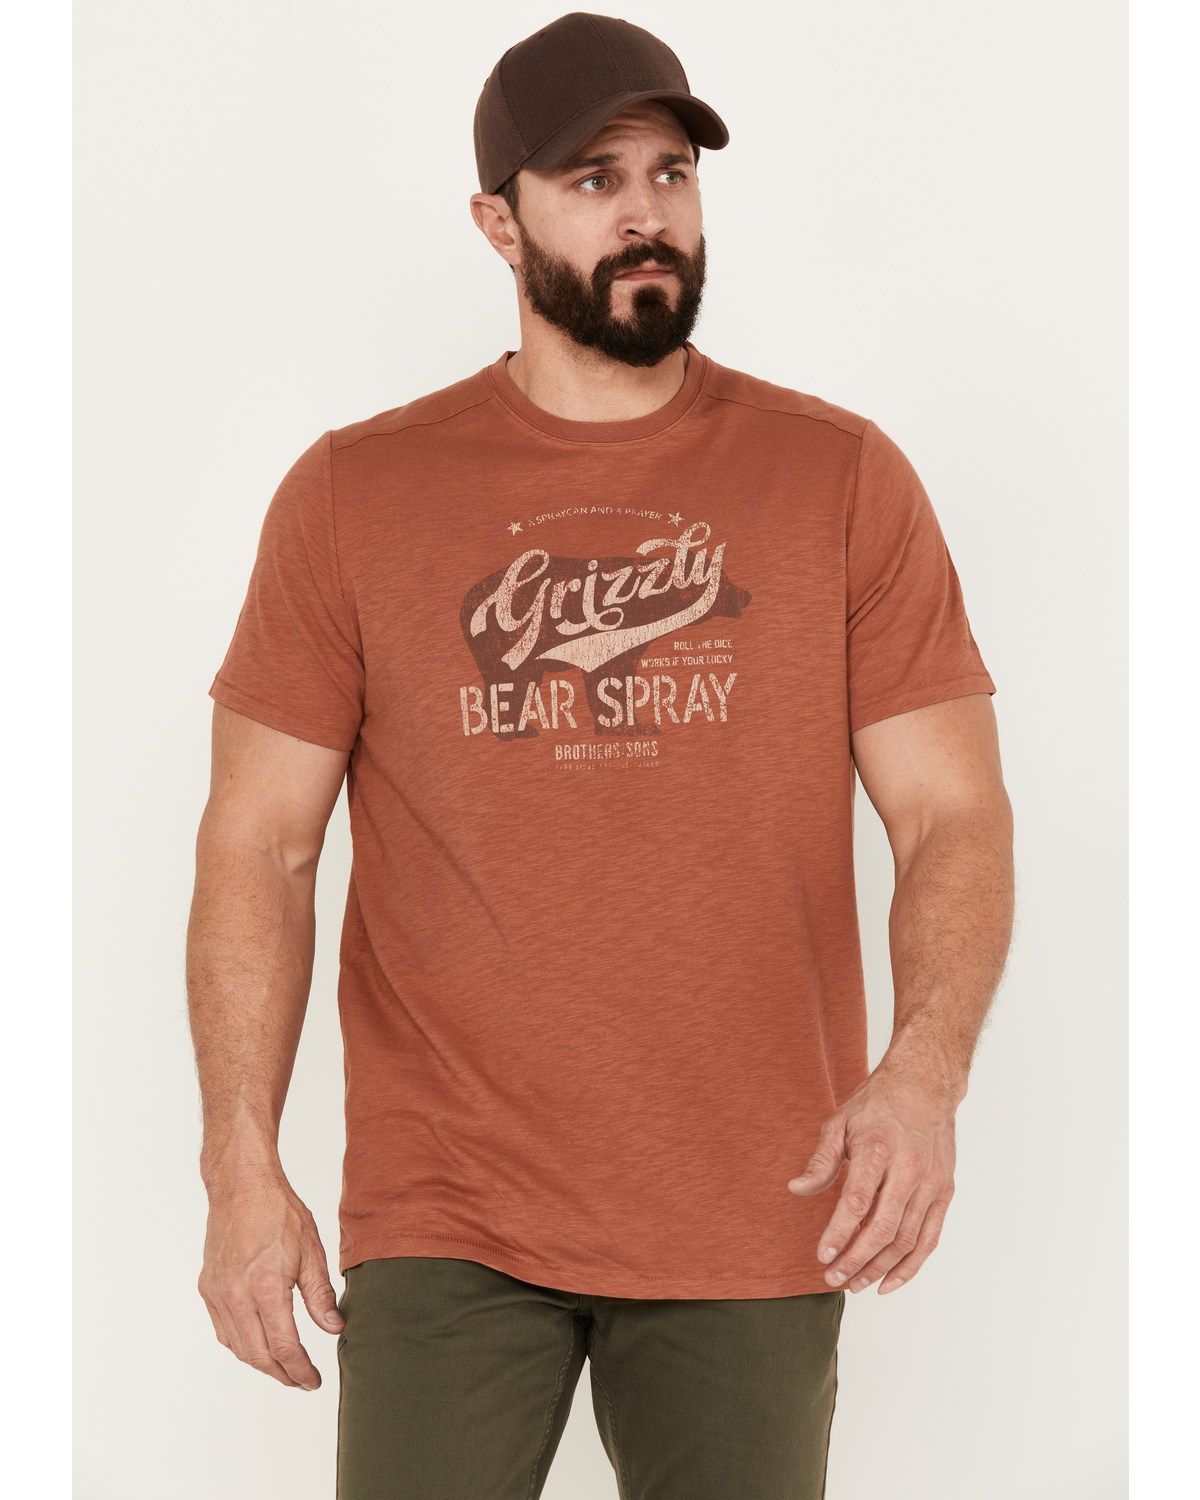 Brothers and Sons Men's Bear Spray Short Sleeve Graphic T-Shirt